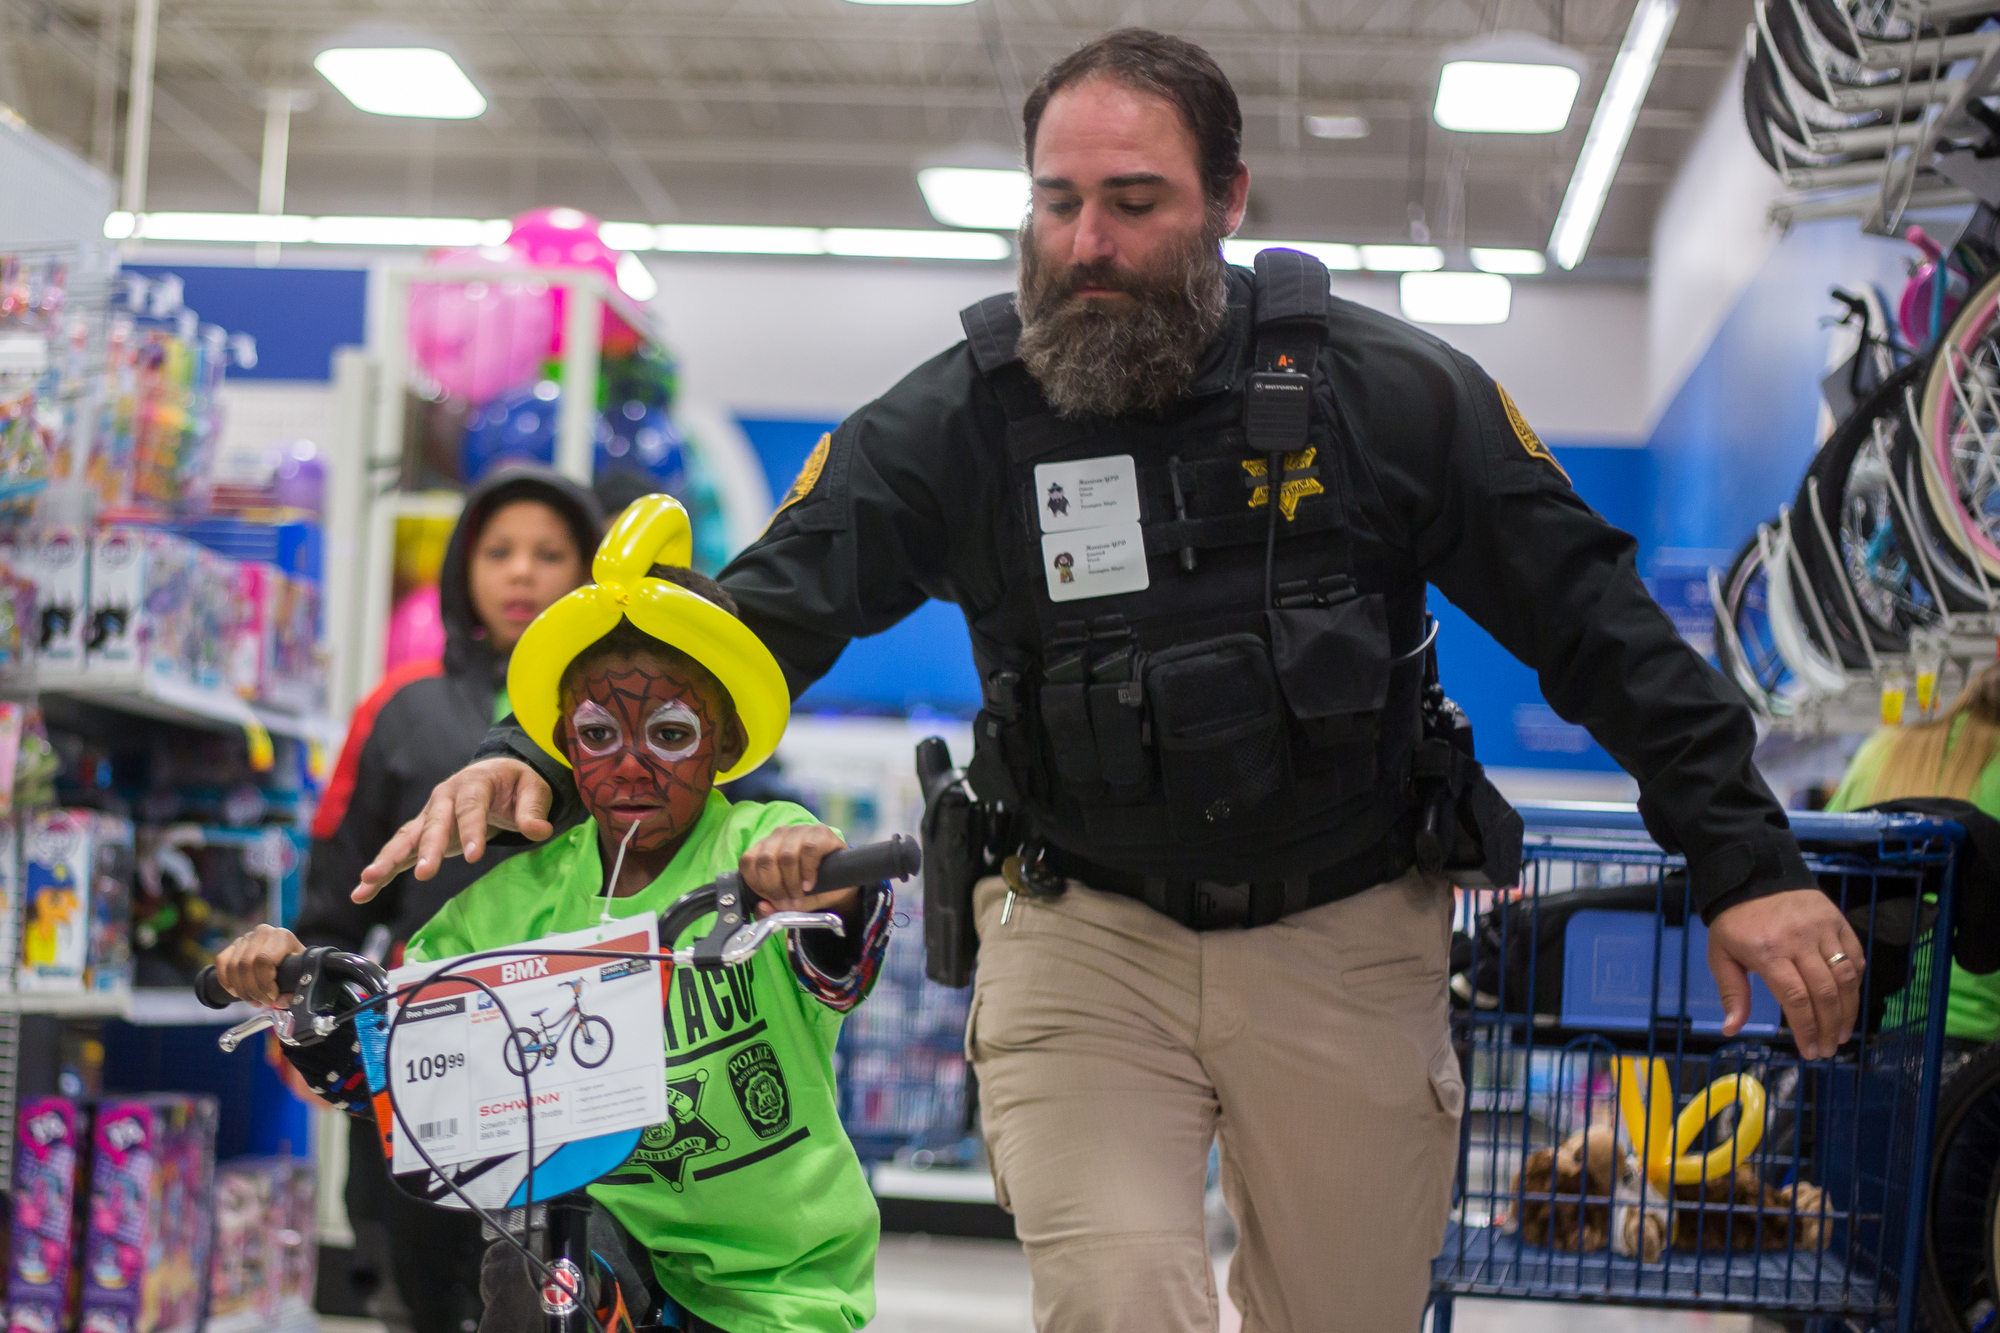  Washtenaw County Sheriff Deputy Buffa pushes Jametrick Woods, 6, on a bike at Meijer in Belleville during the Shop with a Cop on Wednesday, December 7, 2016. The shop with a Cop program paired 100 children with about 120 local police officers, sheri